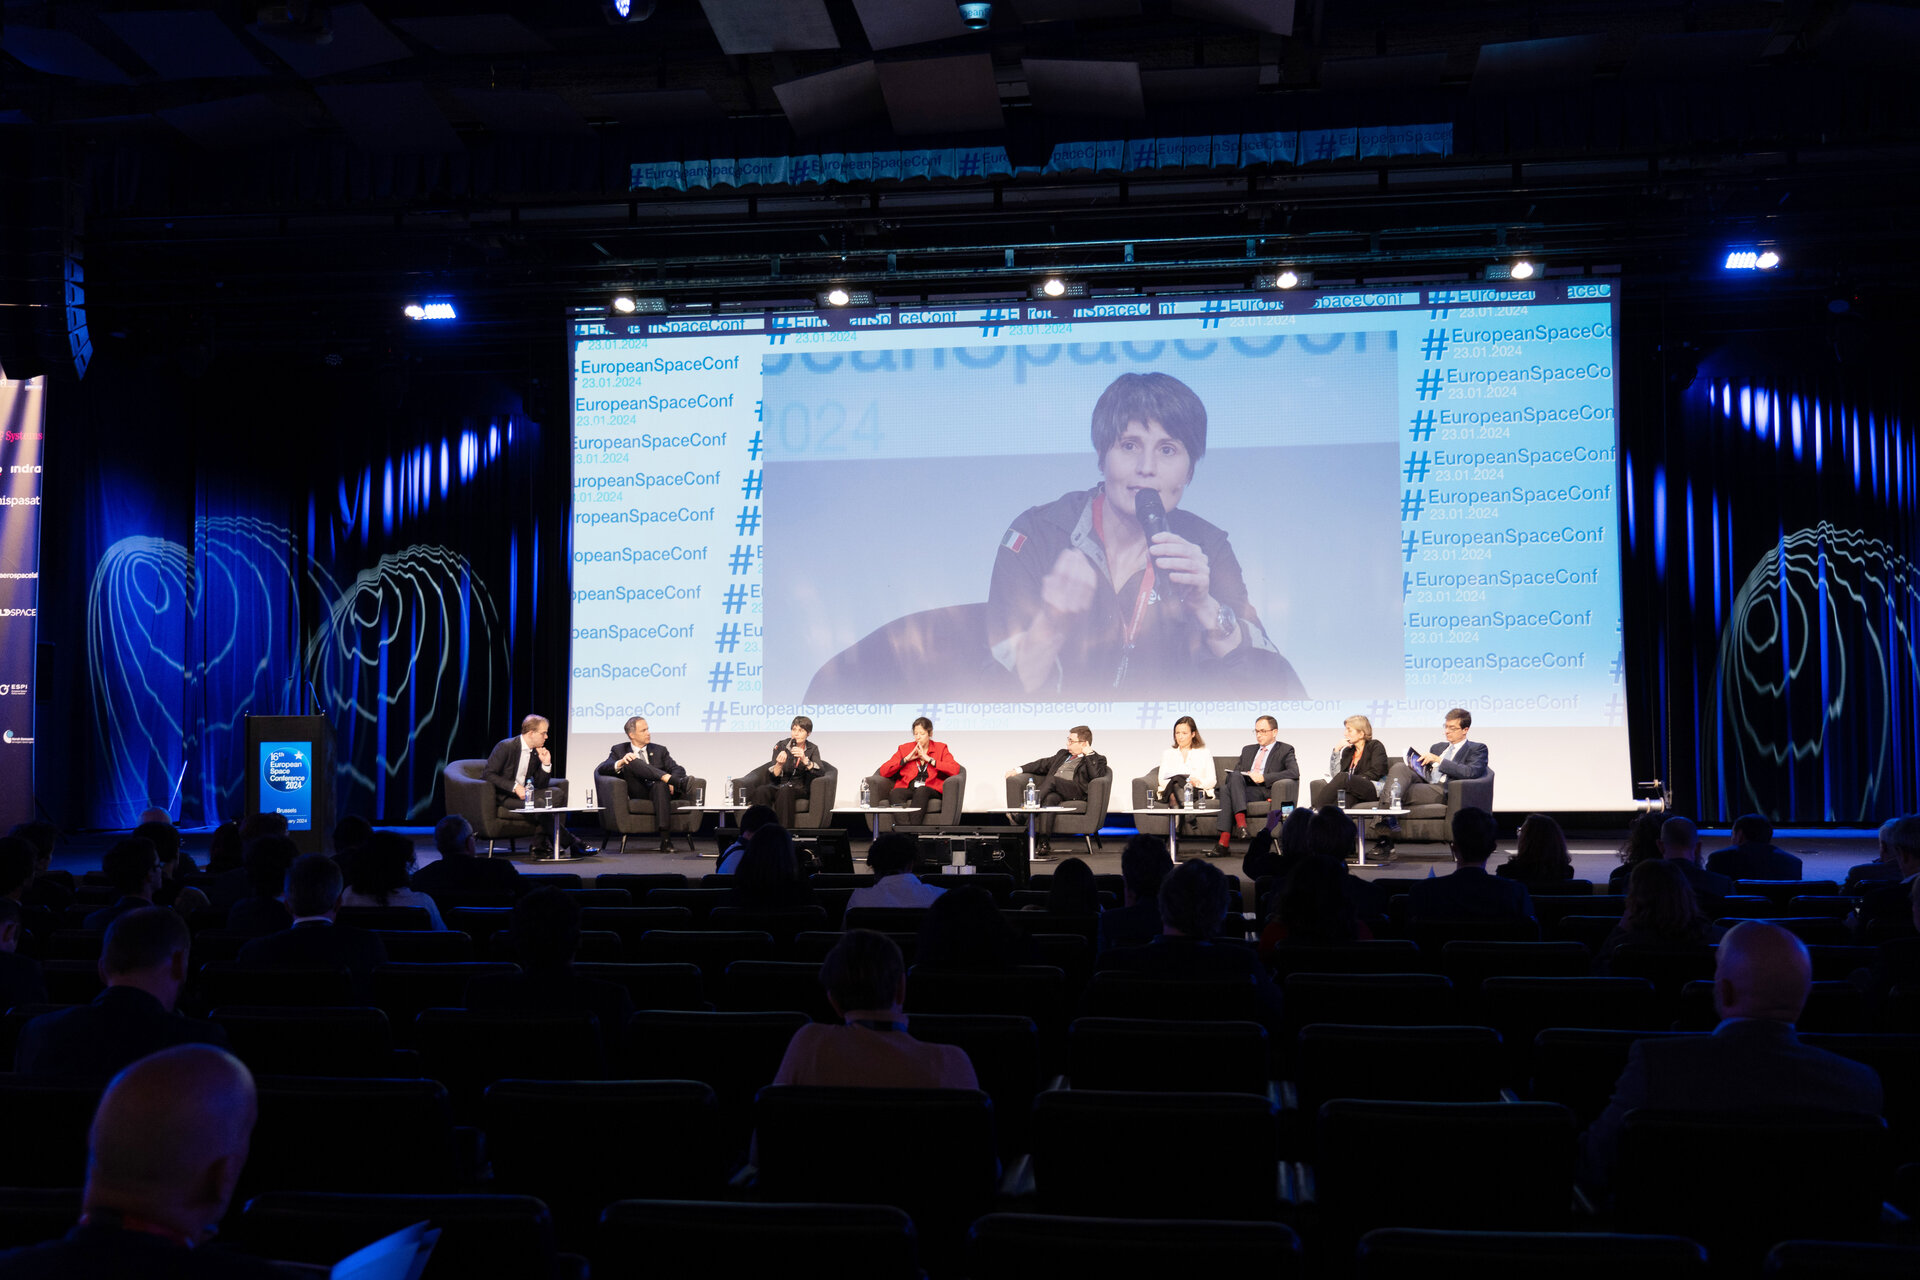 Panel members during the session "The Future of European Space Exploration"